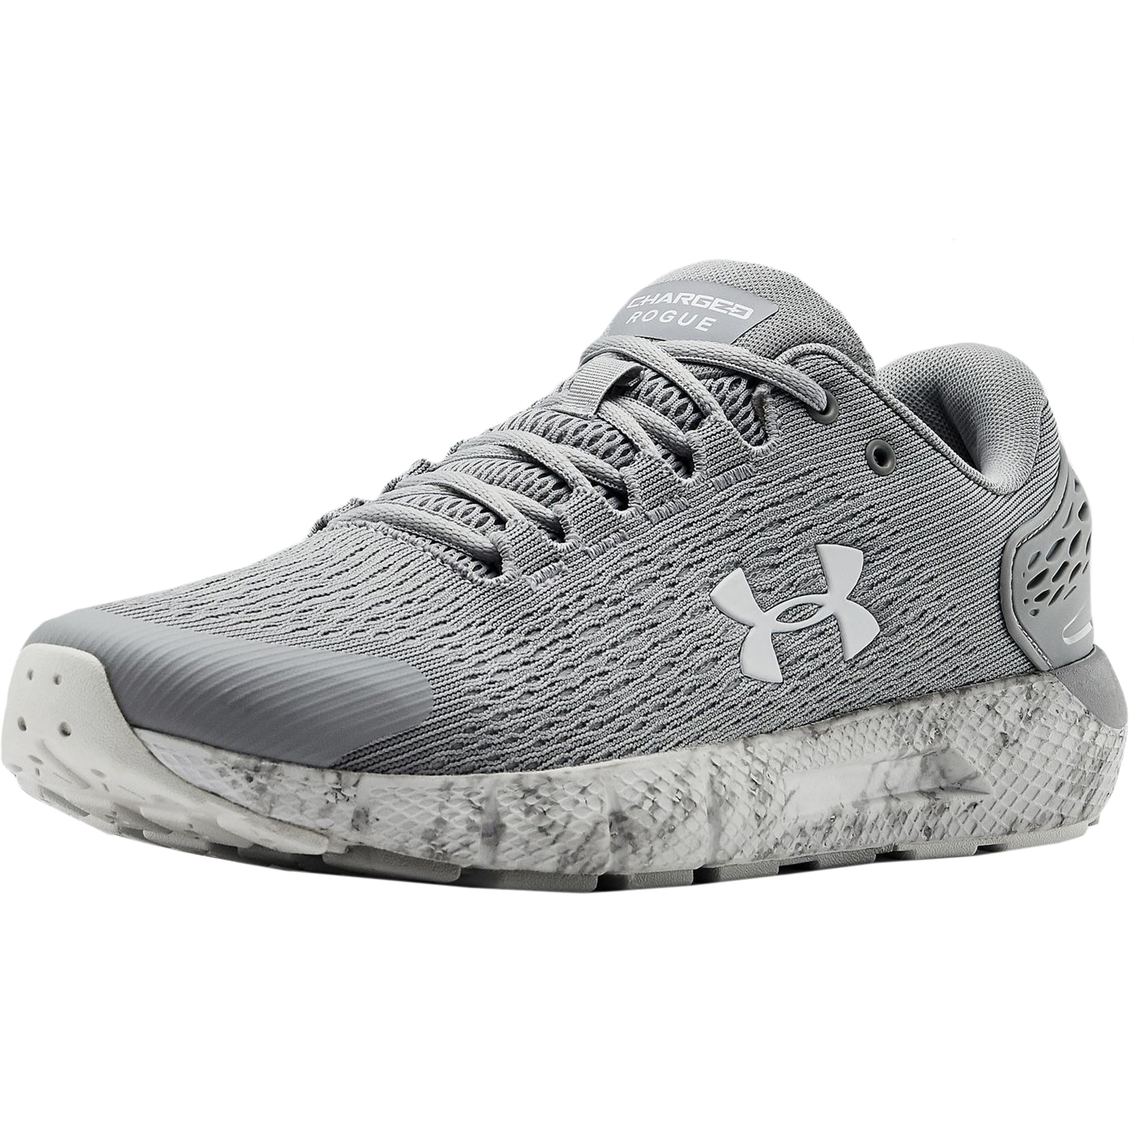 under armour shoes running